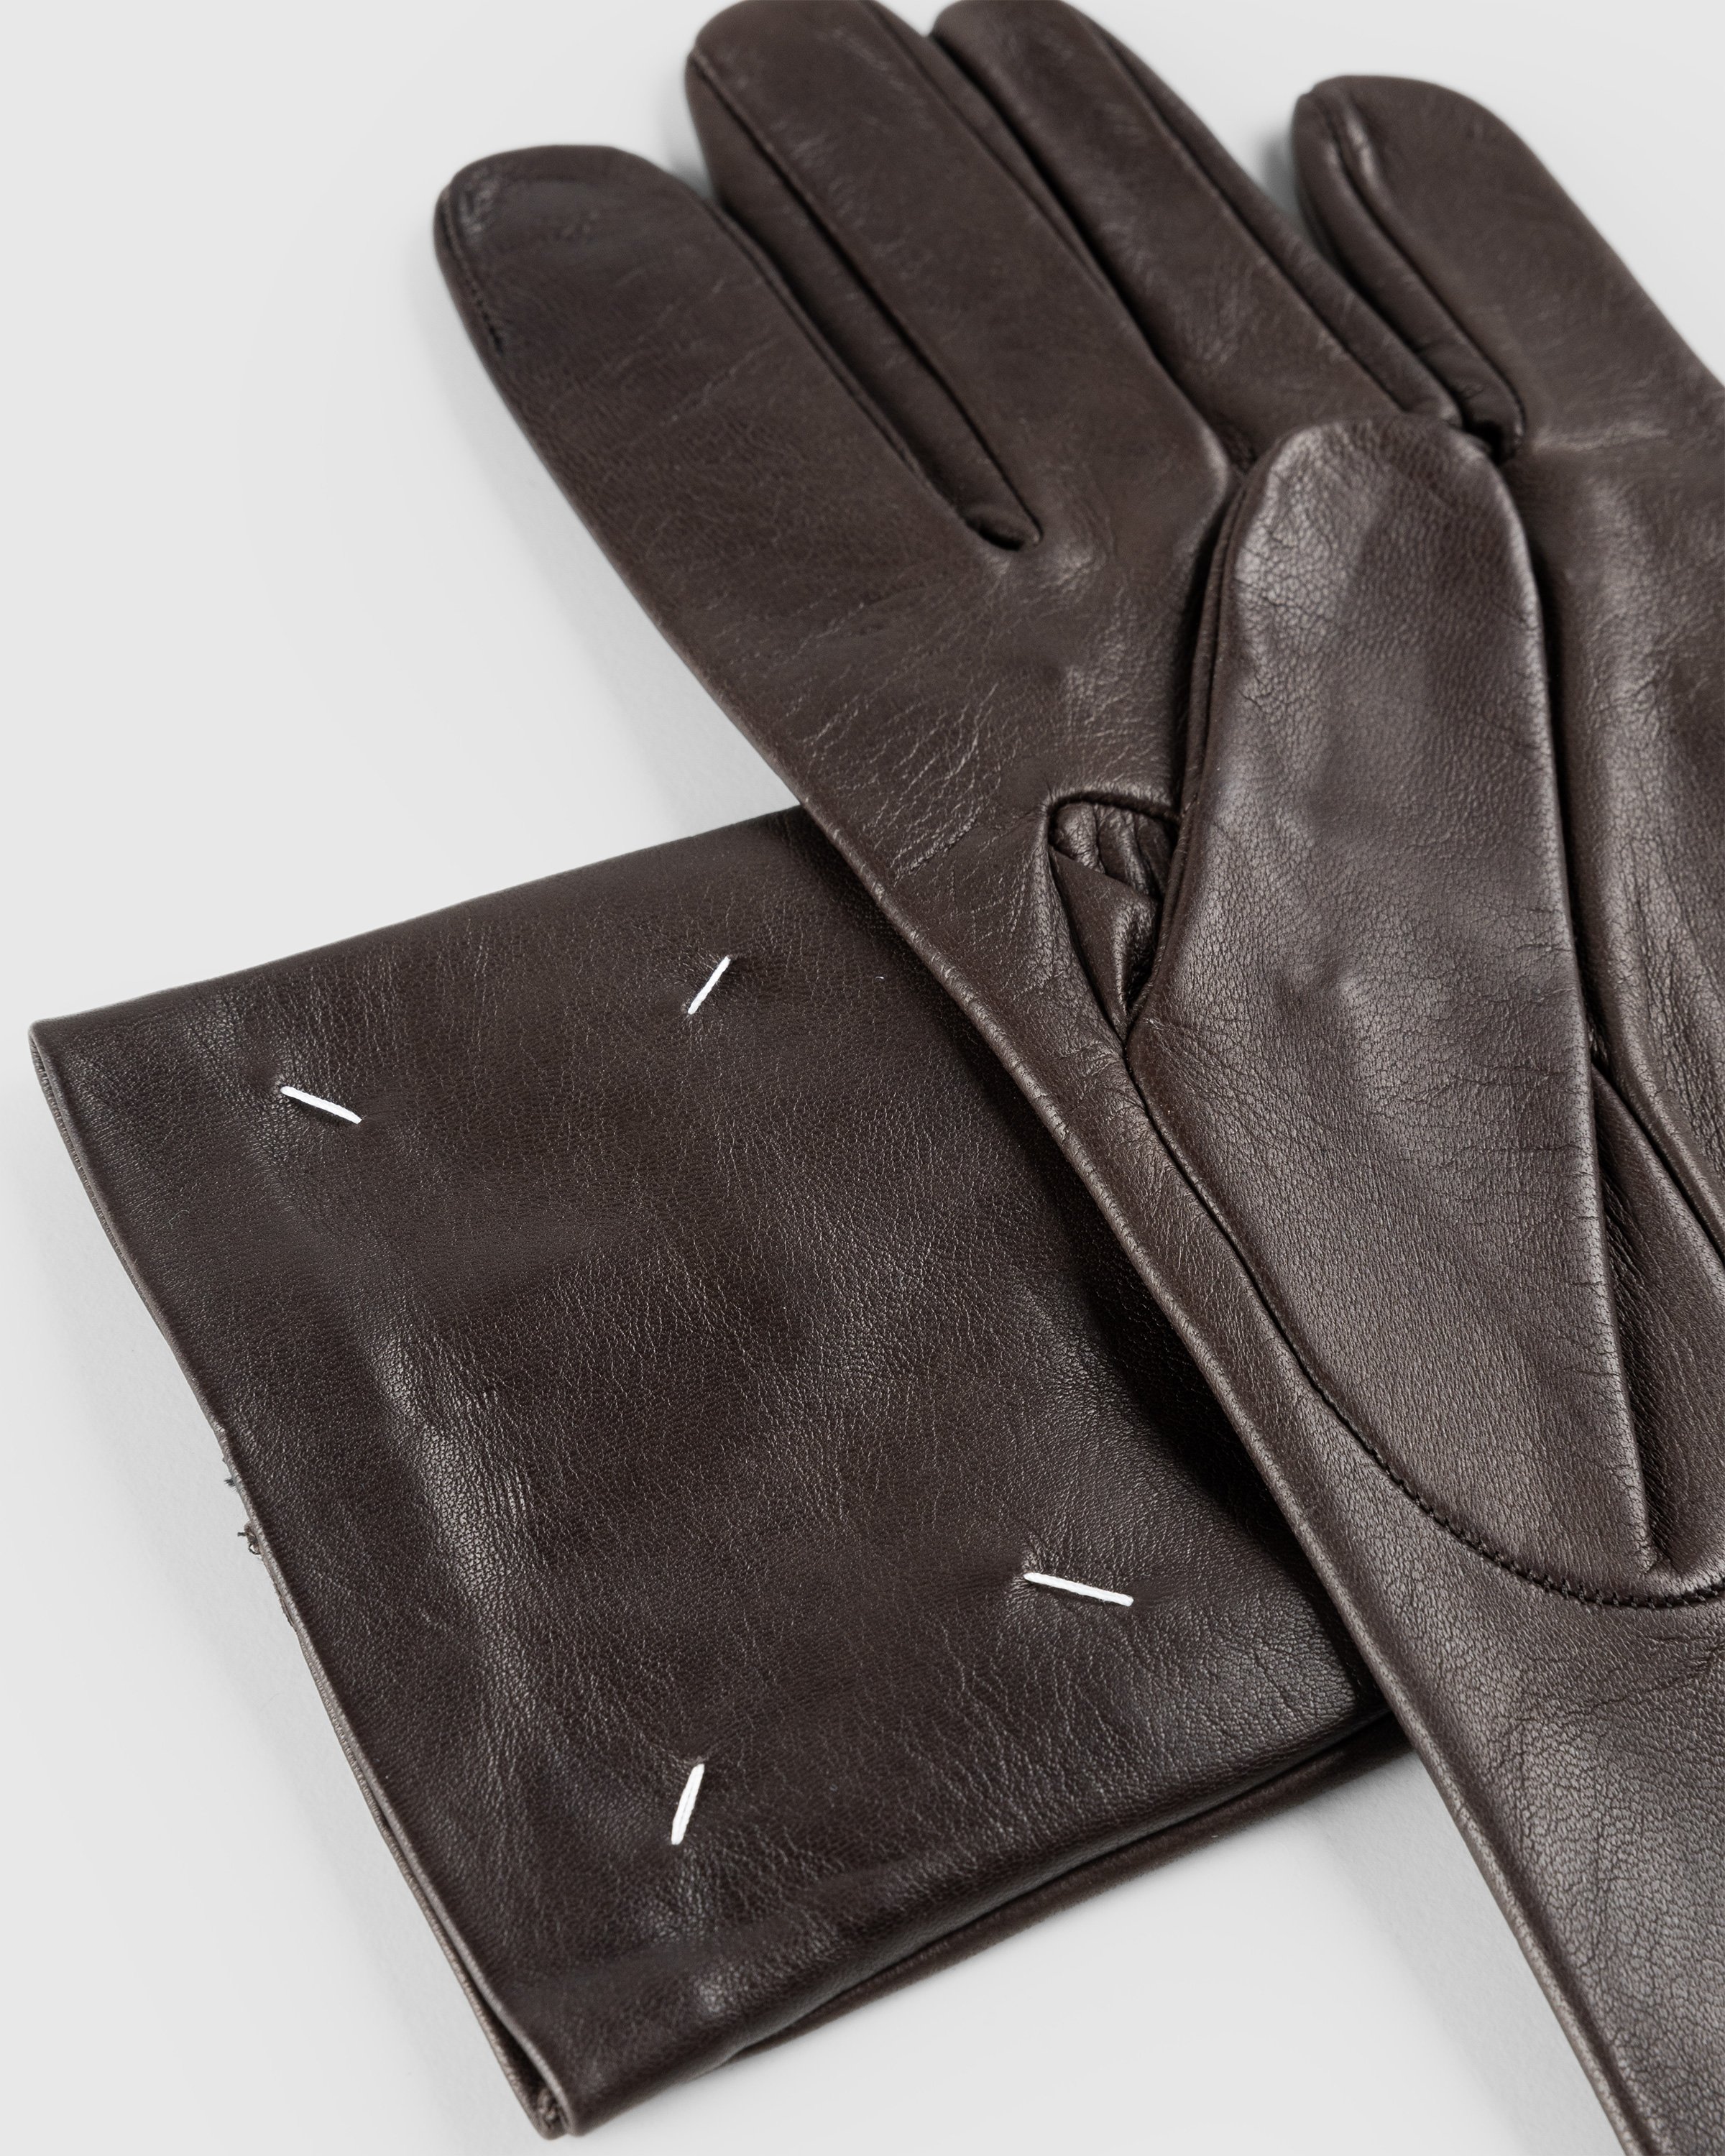 Maison Margiela - Nappa Leather Gloves Chocolate - Accessories - Brown - Image 3